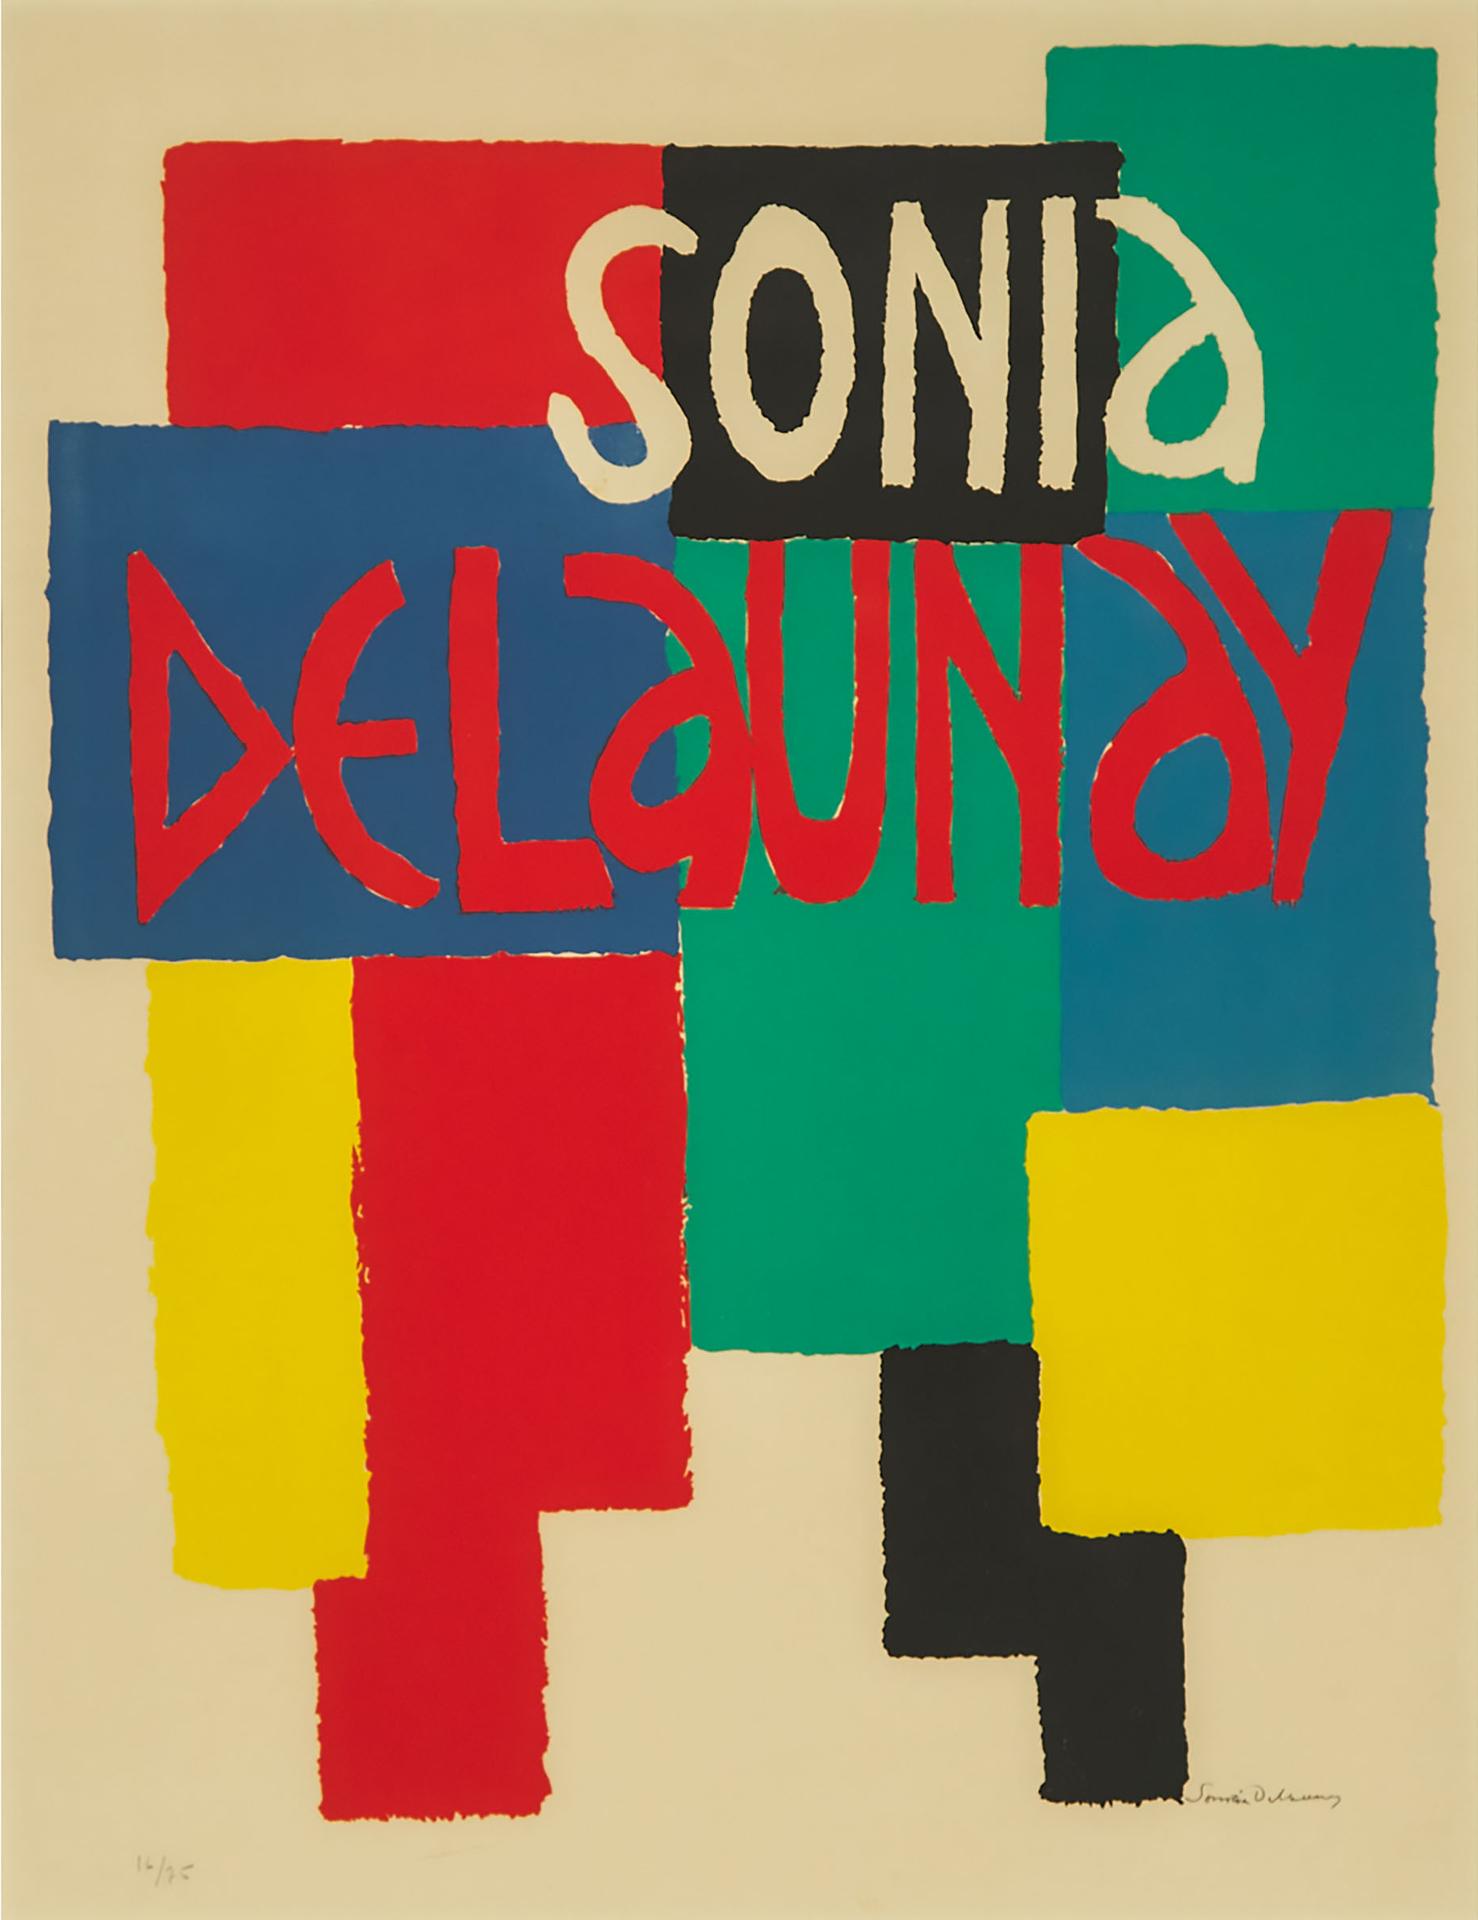 Sonia Delaunay (1885-1979) - Sonia Delaunay, Poster Design Before Letters For The Exhibition 